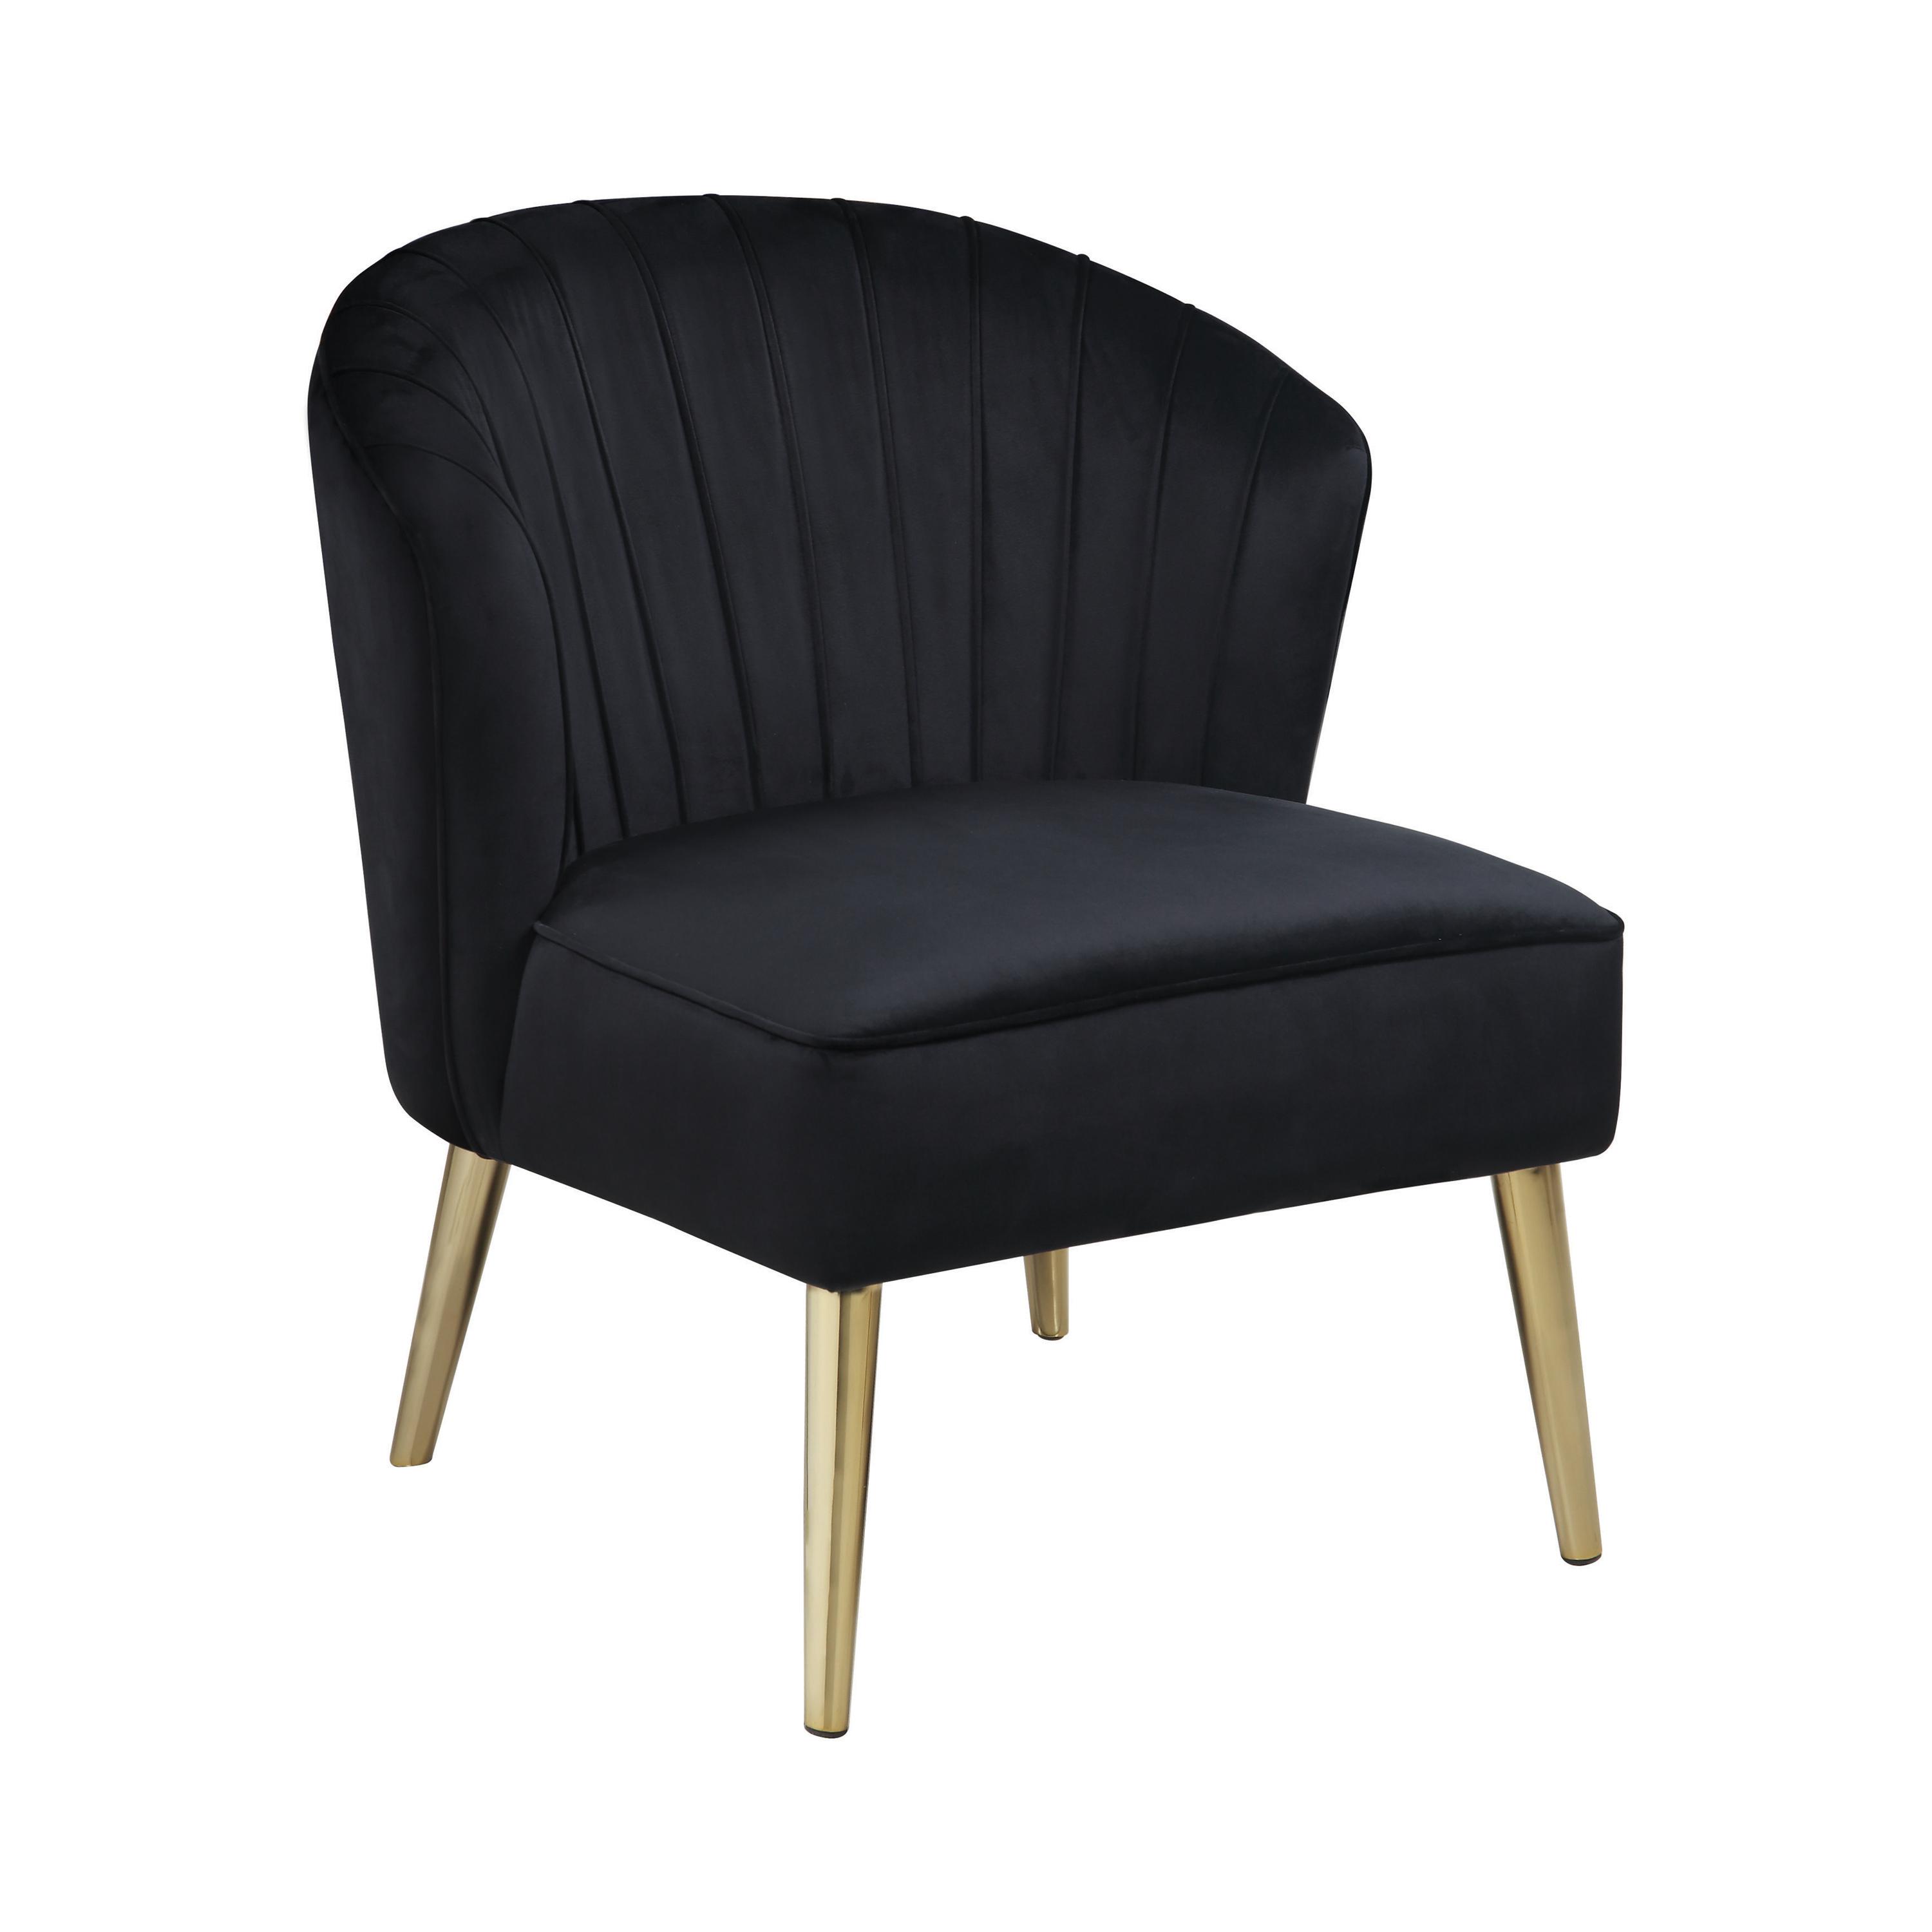 Contemporary Accent Chair 903030 903030 in Black Velvet